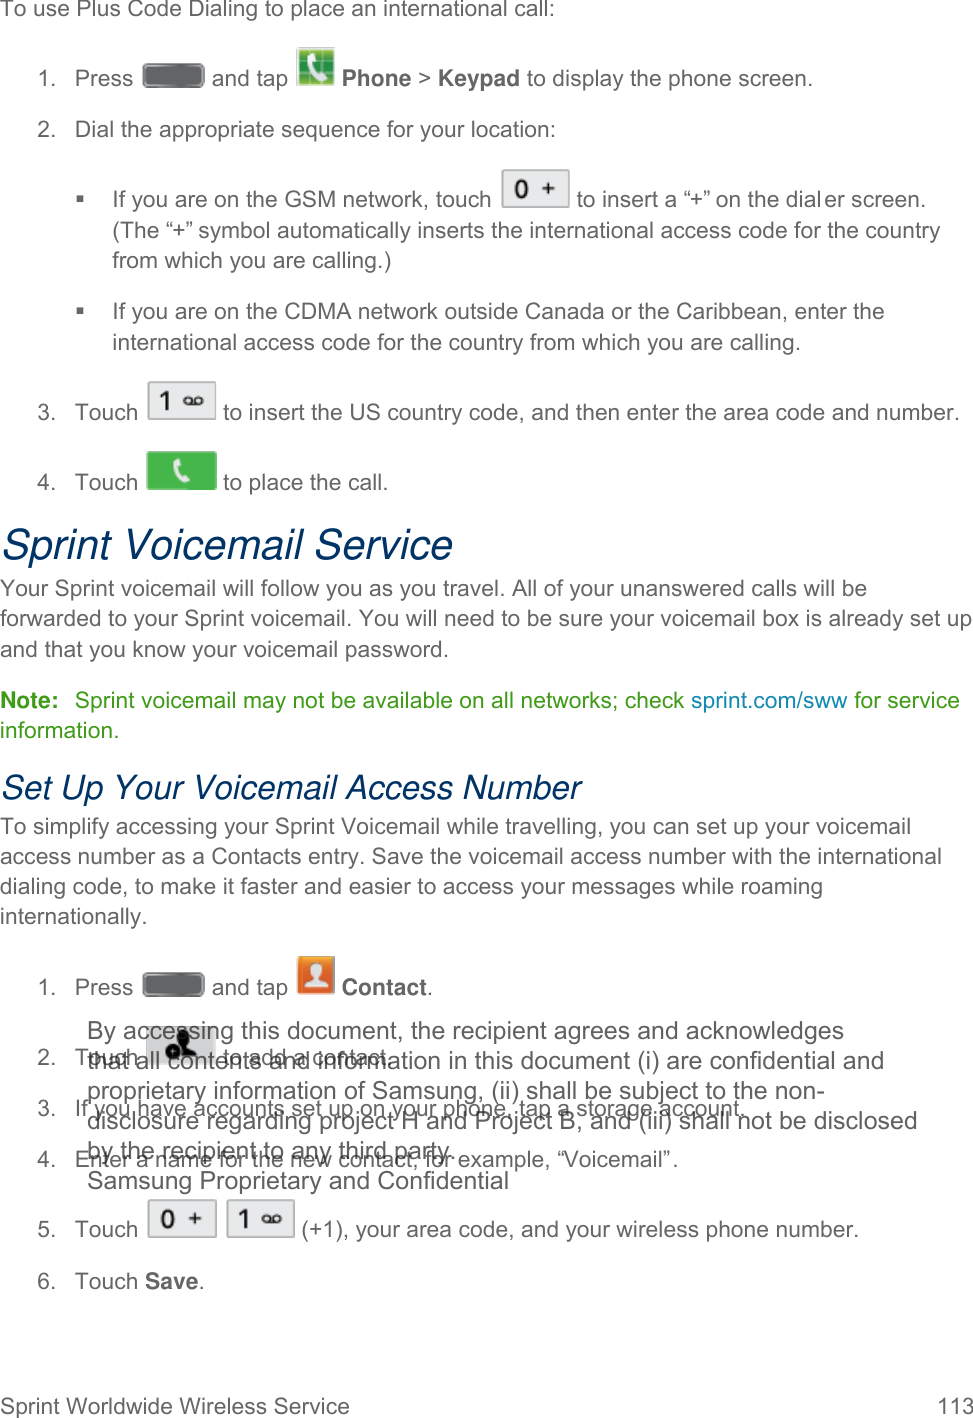  Sprint Worldwide Wireless Service 113   To use Plus Code Dialing to place an international call:  1.  Press   and tap   Phone &gt; Keypad to display the phone screen. 2. Dial the appropriate sequence for your location:  If you are on the GSM network, touch   to insert a “+” on the dial er screen. (The “+” symbol automatically inserts the international access code for the country from which you are calling.)  If you are on the CDMA network outside Canada or the Caribbean, enter the international access code for the country from which you are calling. 3. Touch   to insert the US country code, and then enter the area code and number. 4. Touch   to place the call. Sprint Voicemail Service Your Sprint voicemail will follow you as you travel. All of your unanswered calls will be forwarded to your Sprint voicemail. You will need to be sure your voicemail box is already set up and that you know your voicemail password. Note: Sprint voicemail may not be available on all networks; check sprint.com/sww for service information. Set Up Your Voicemail Access Number To simplify accessing your Sprint Voicemail while travelling, you can set up your voicemail access number as a Contacts entry. Save the voicemail access number with the international dialing code, to make it faster and easier to access your messages while roaming internationally. 1.  Press   and tap   Contact. 2. Touch   to add a contact. 3. If you have accounts set up on your phone, tap a storage account. 4. Enter a name for the new contact, for example, “Voicemail”. 5. Touch     (+1), your area code, and your wireless phone number.  6. Touch Save. By accessing this document, the recipient agrees and acknowledges that all contents and information in this document (i) are confidential and proprietary information of Samsung, (ii) shall be subject to the non- disclosure regarding project H and Project B, and (iii) shall not be disclosed by the recipient to any third party. Samsung Proprietary and Confidential 